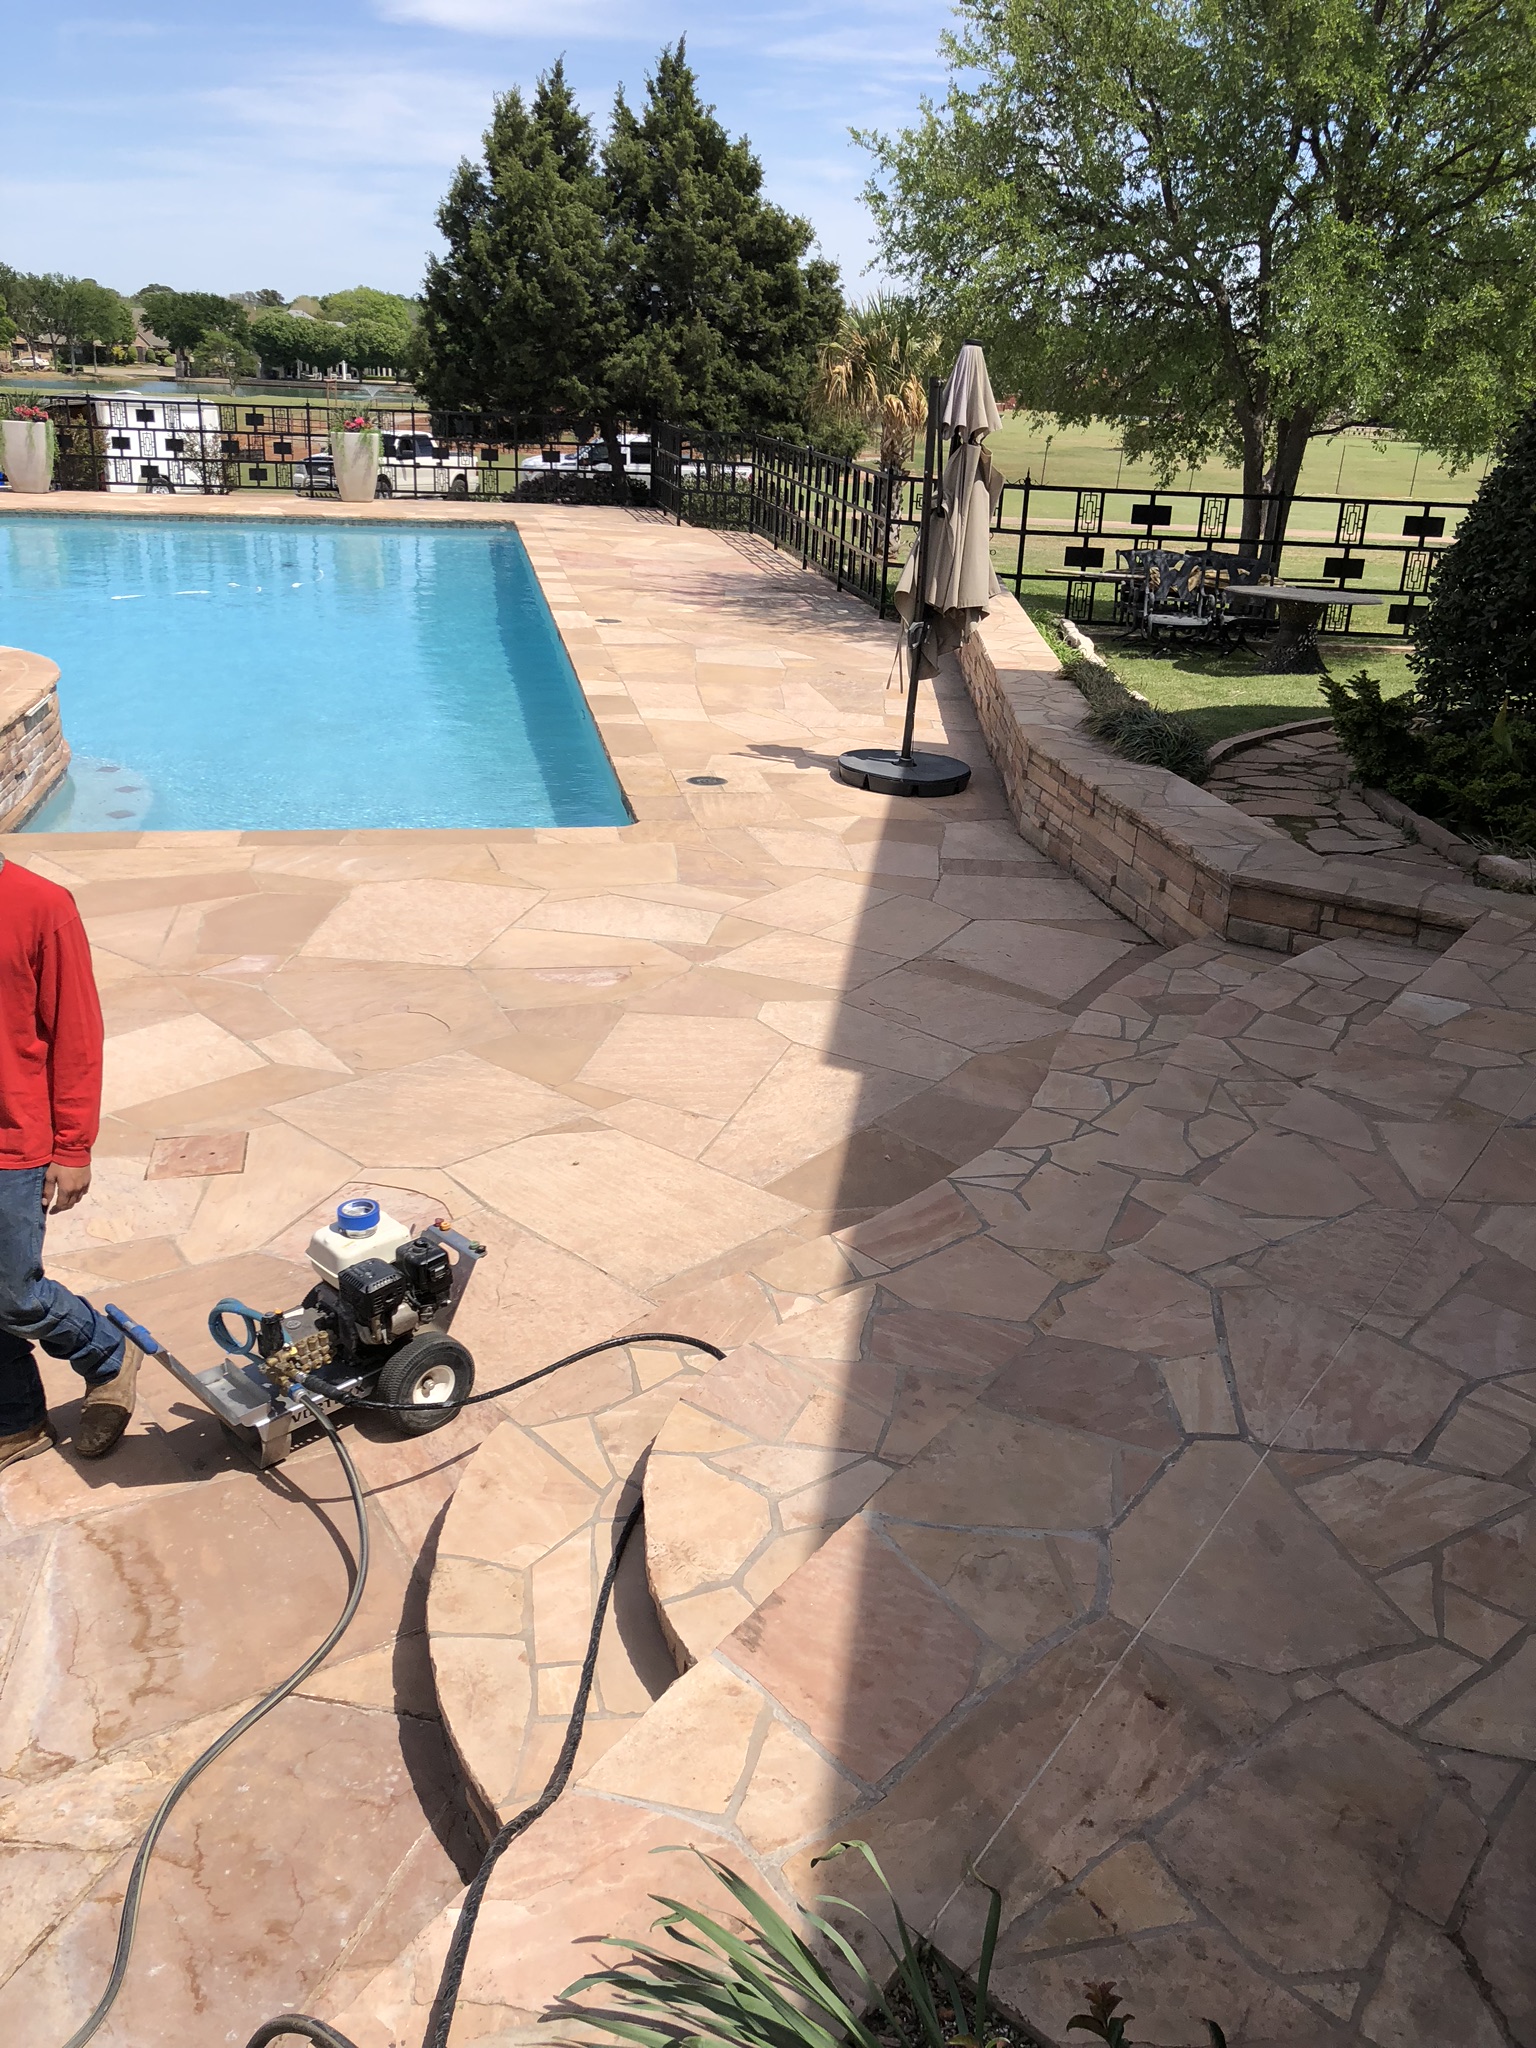 It took our team two days to install the Stone Armor product for over 6,000 Square Feet of Arizona Flagstone. That's an incredible pace for such a large surface area to install this product. At Advocate Construction, we care about doing the job quickly and efficiently. 